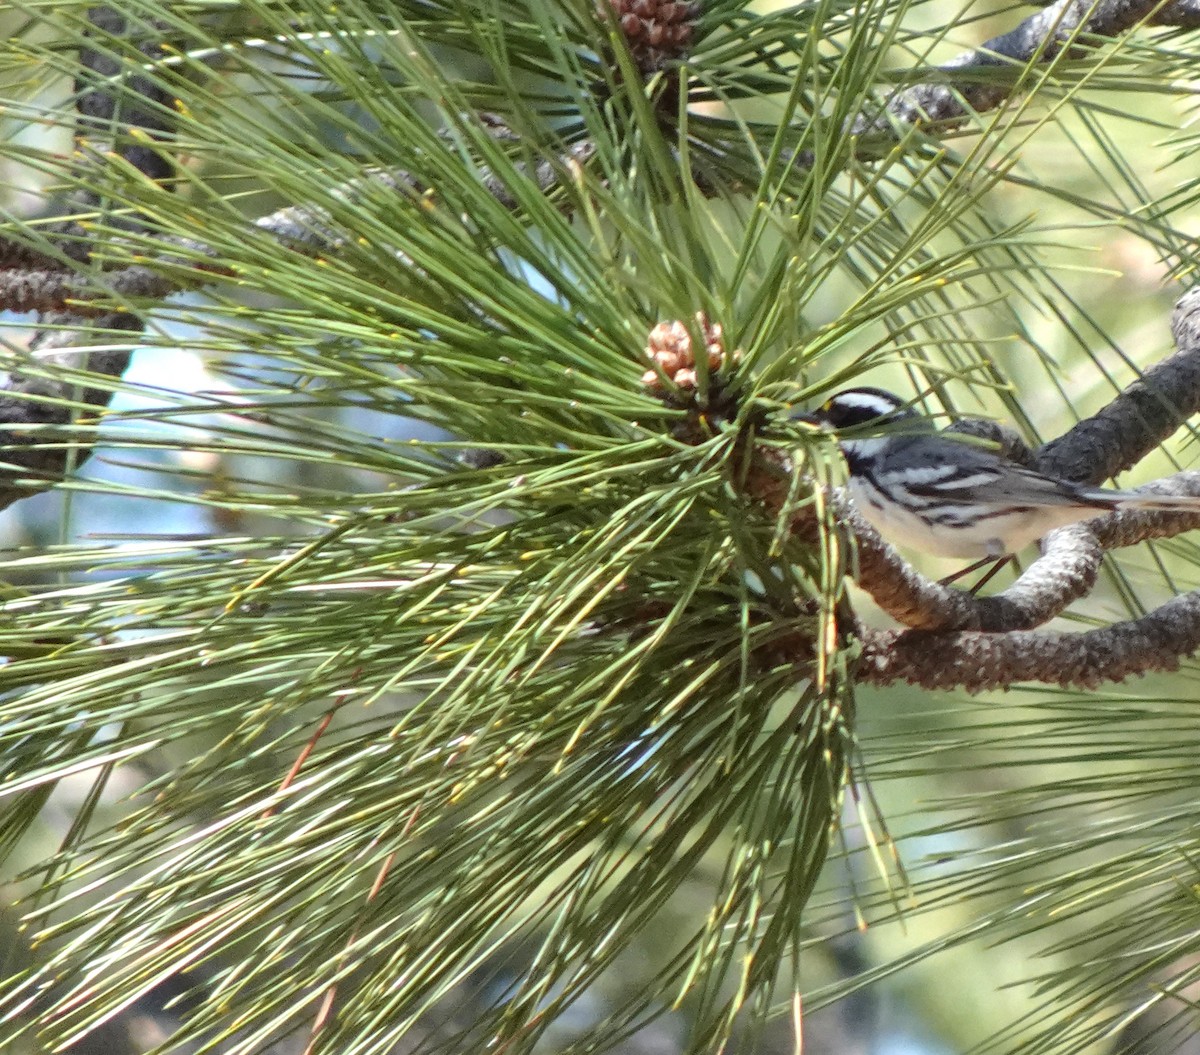 Black-throated Gray Warbler - Audrey E.